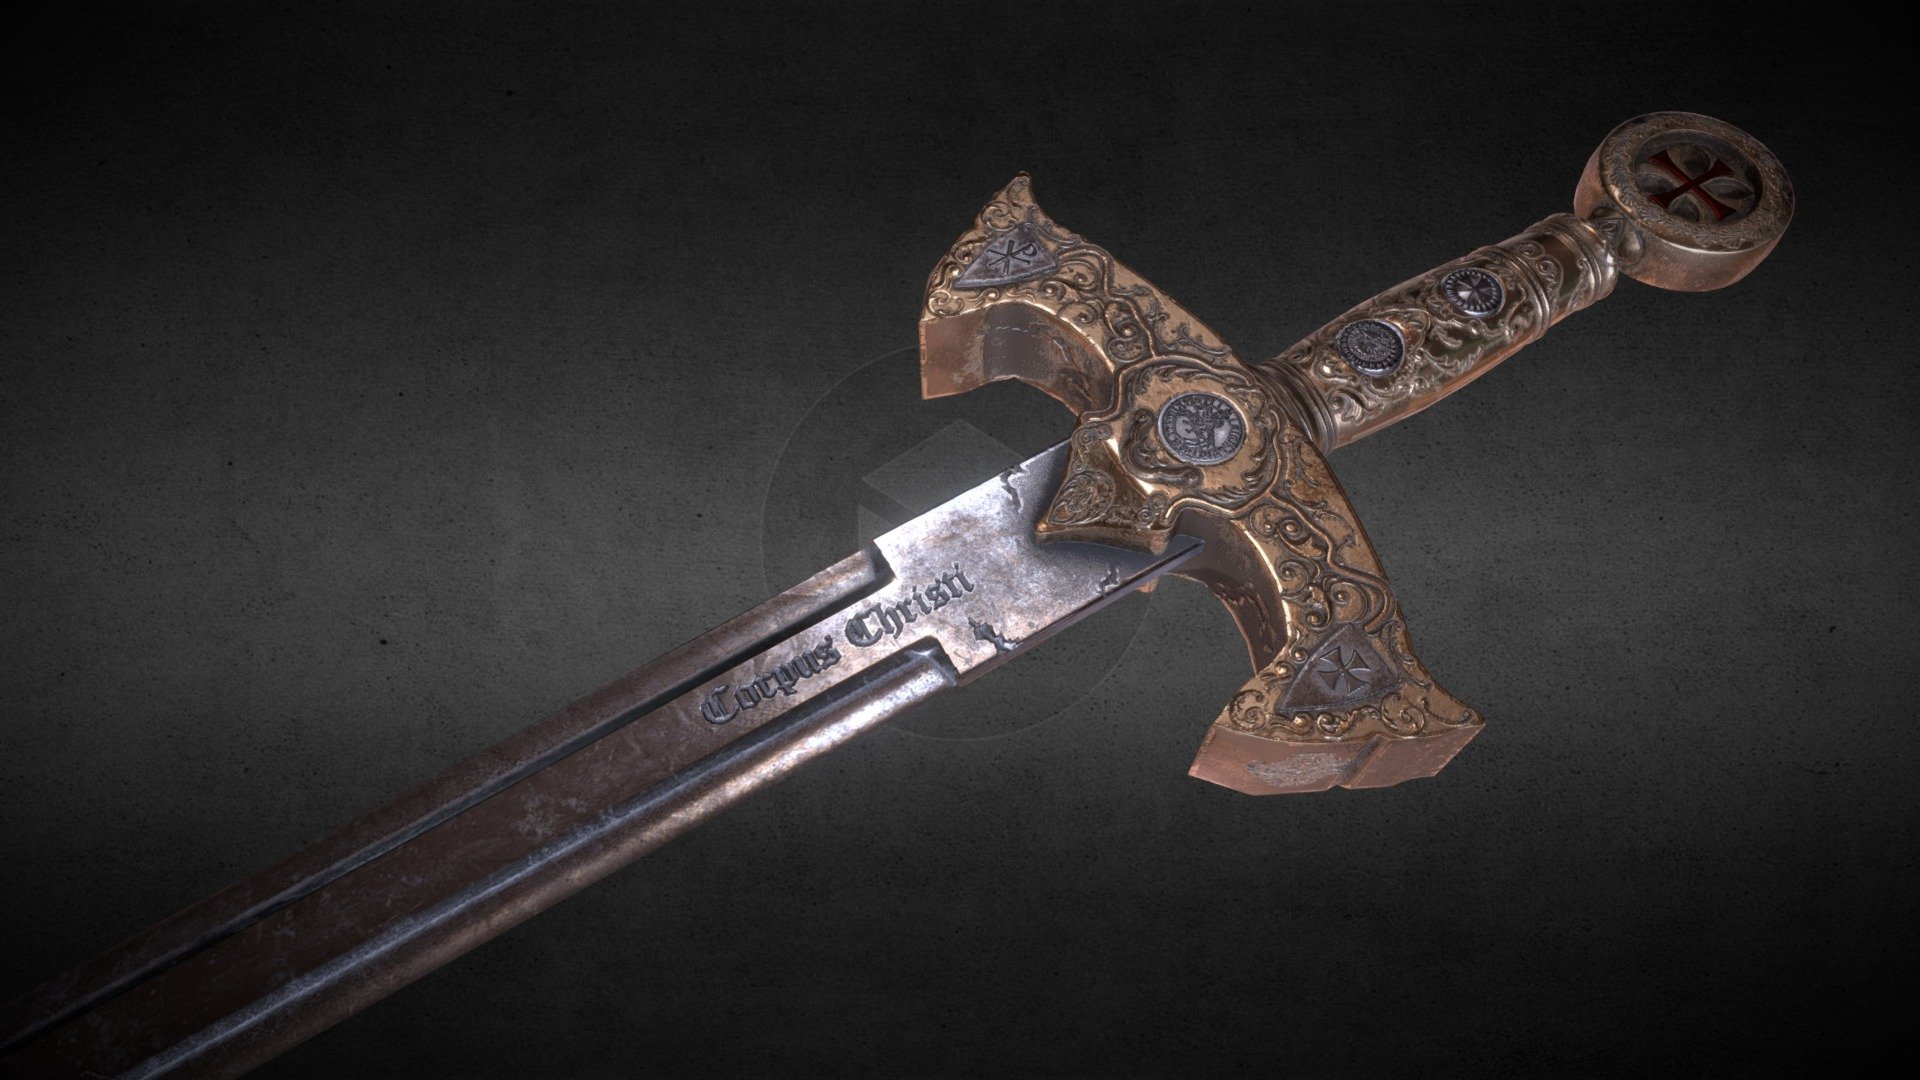 I have not made a sword in a while, so this is the latest edition. This is a knights templar sword, made in blender, sculpted details were made in Zbrush and finally textured in Substance Painter. I had a lot of fun making this, after watching the Da Vinci Code, when talking about the knights templar, I had to make their sword 3d model